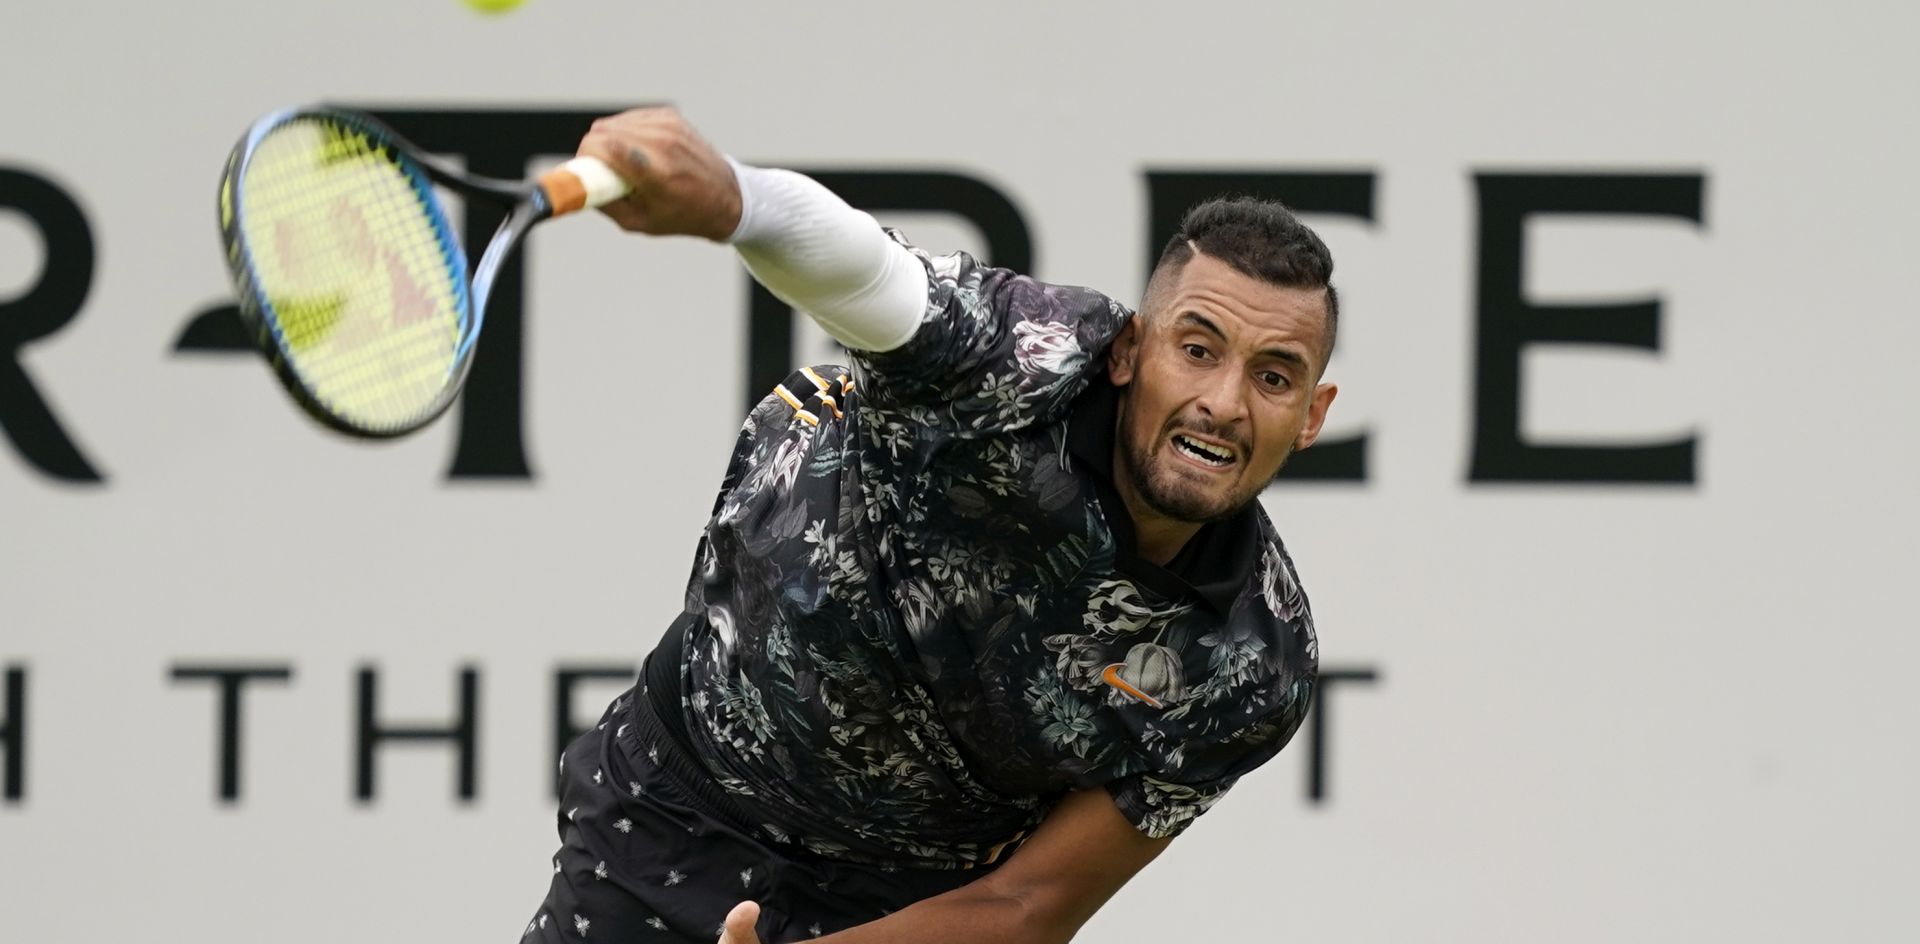 epa07660798 Australia's Nick Kyrgios serves to Spain's Roberto Carballes Baena during their round 32 match at the Fever Tree Championship at Queen's Club in London, Britain, 20 June 2019.  EPA/WILL OLIVER